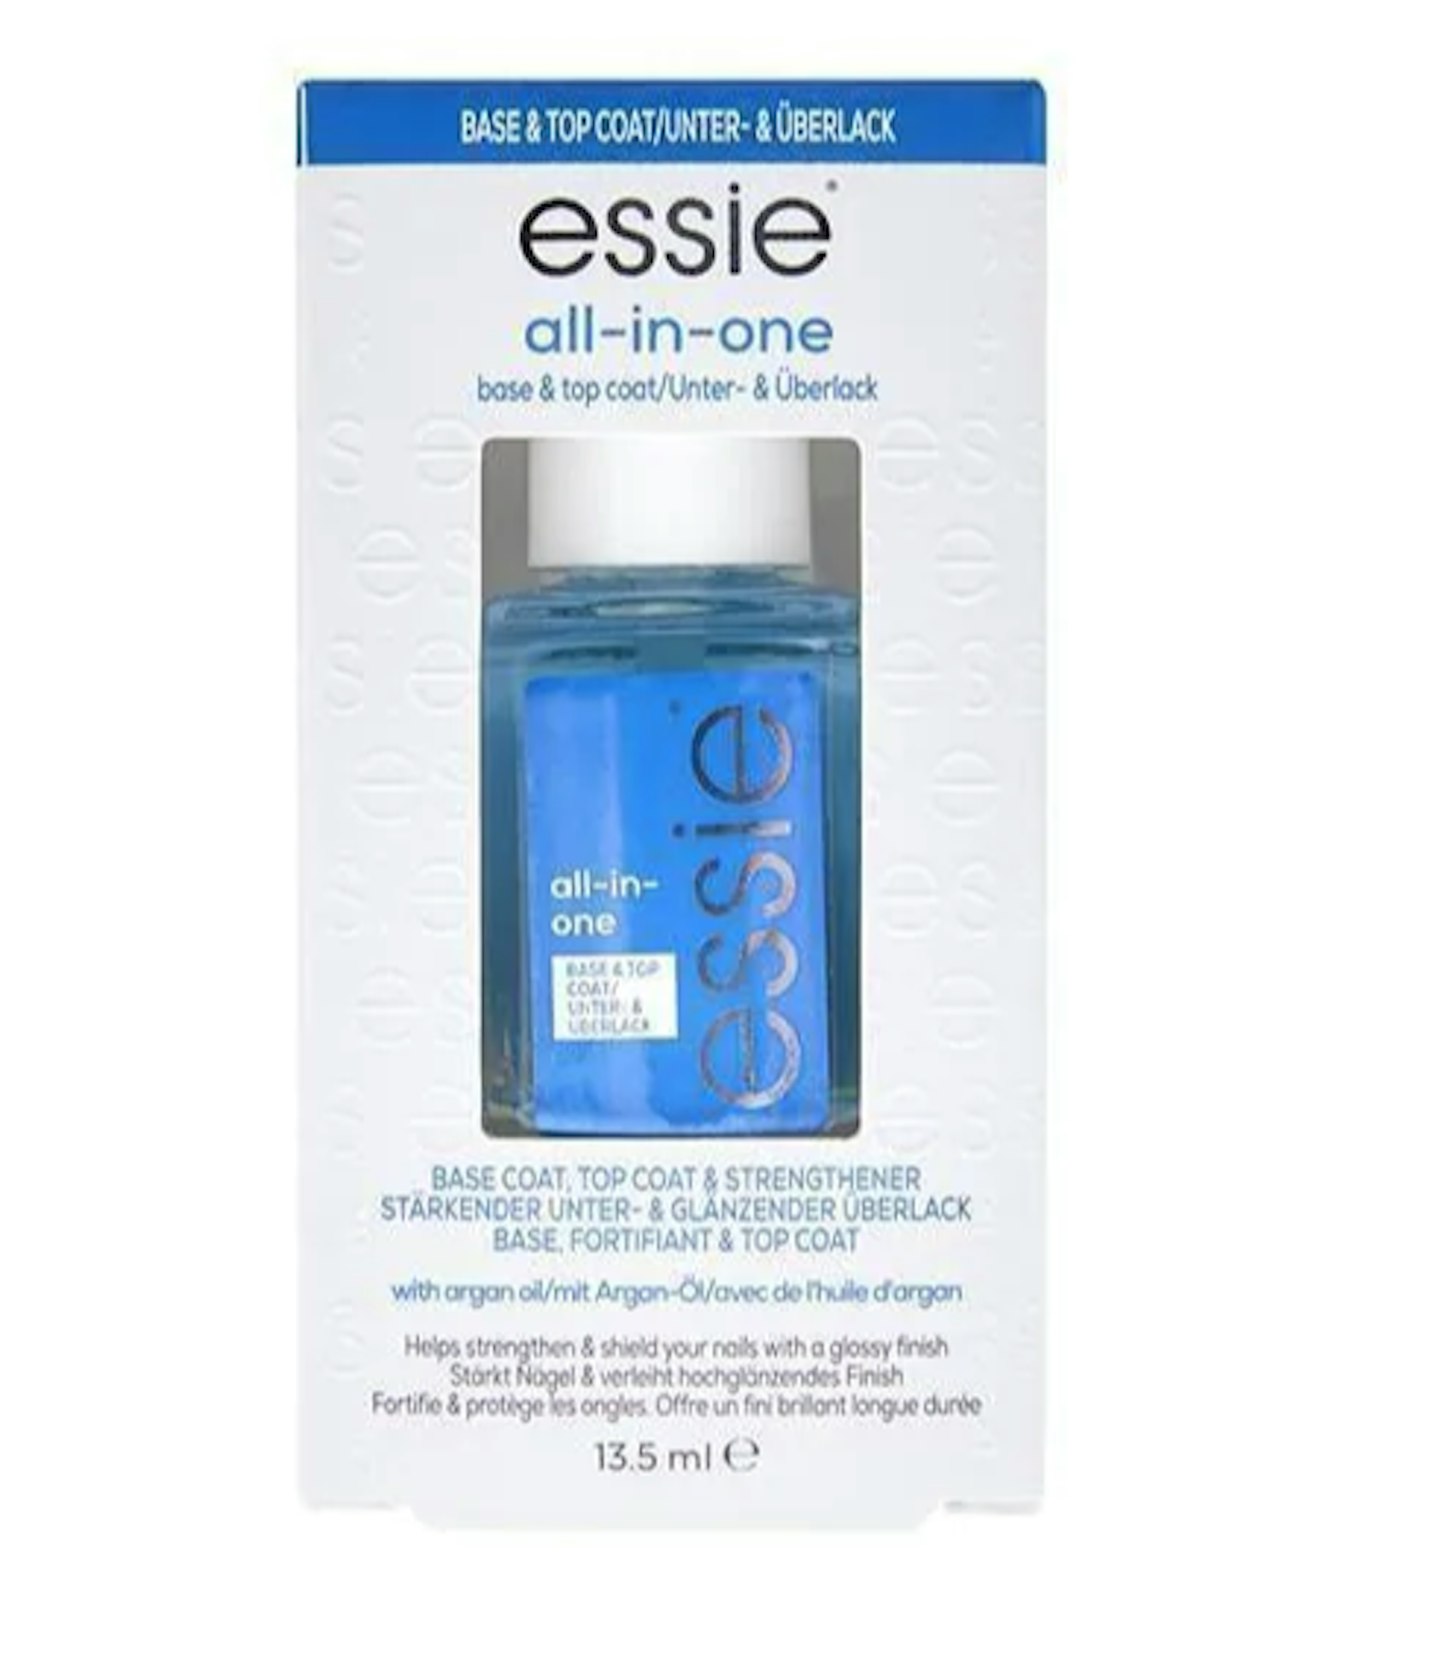 essie Nail Care All In One Nail Polish Base and Top Coat, 8.99